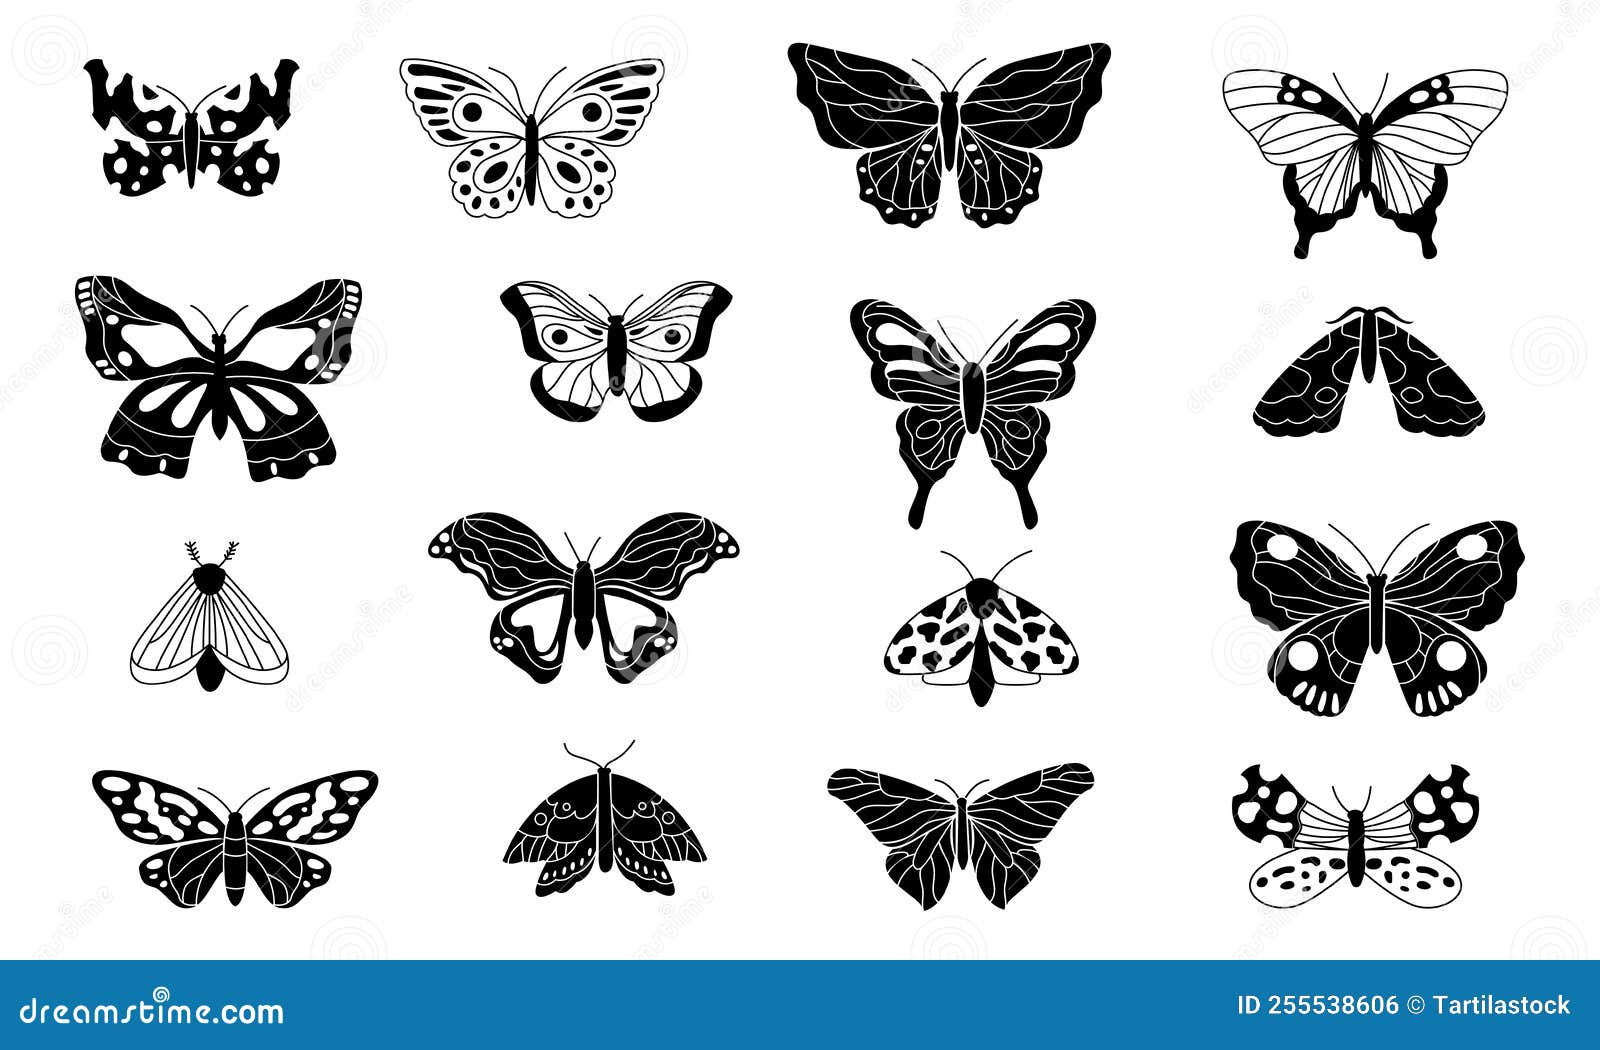 Black Butterflies. Decorative Butterfly Silhouettes, Winged Insect Sketch Elements for Tattoo Design, Vintage Scrapbook Stock Vector - Illustration of animal, outline: 255538606